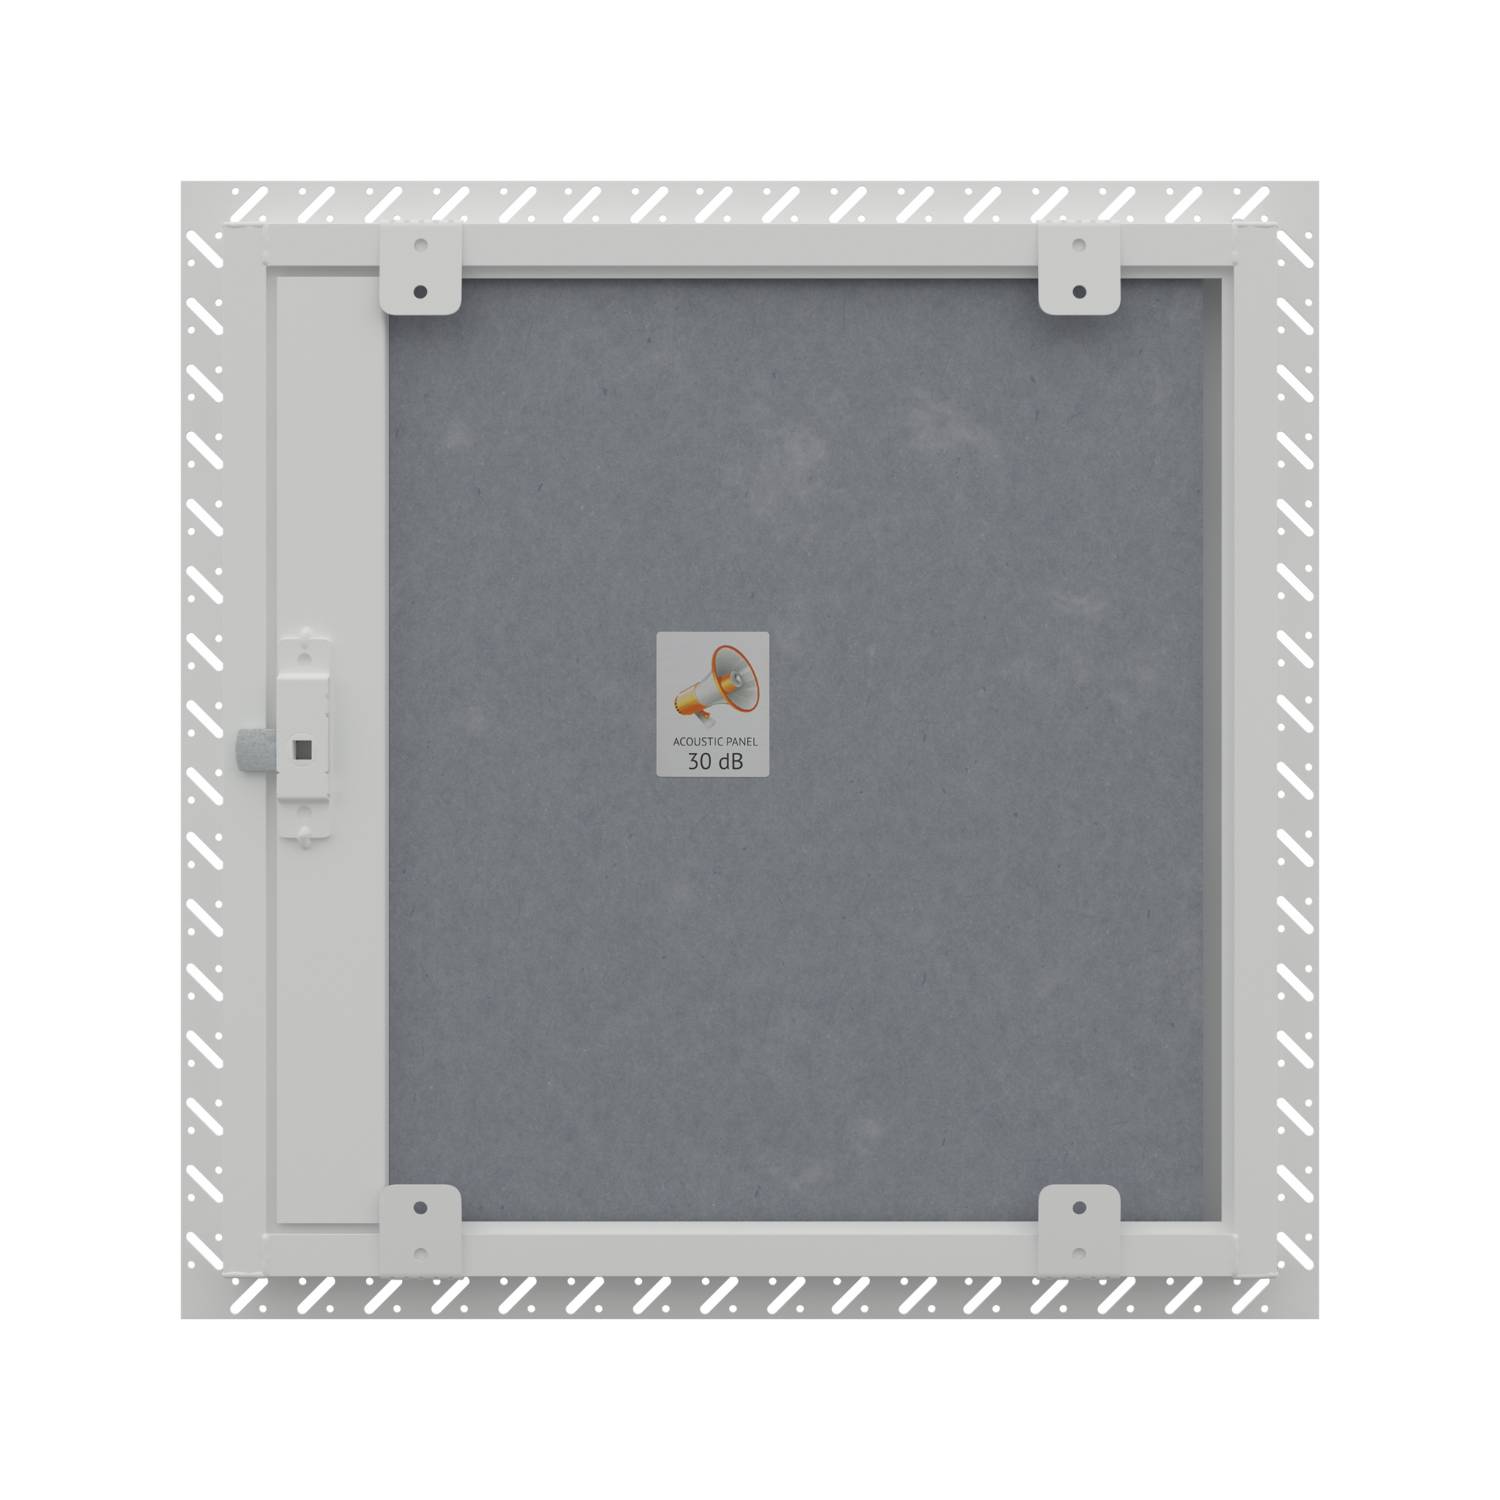 Slimfit Wall Metal Access Panel (EX01 Range) - Beaded Frame - 2 Hour Fire Rated  - Smoke Tested - 30dB Acoustic Rated - Airtight - Access Panel